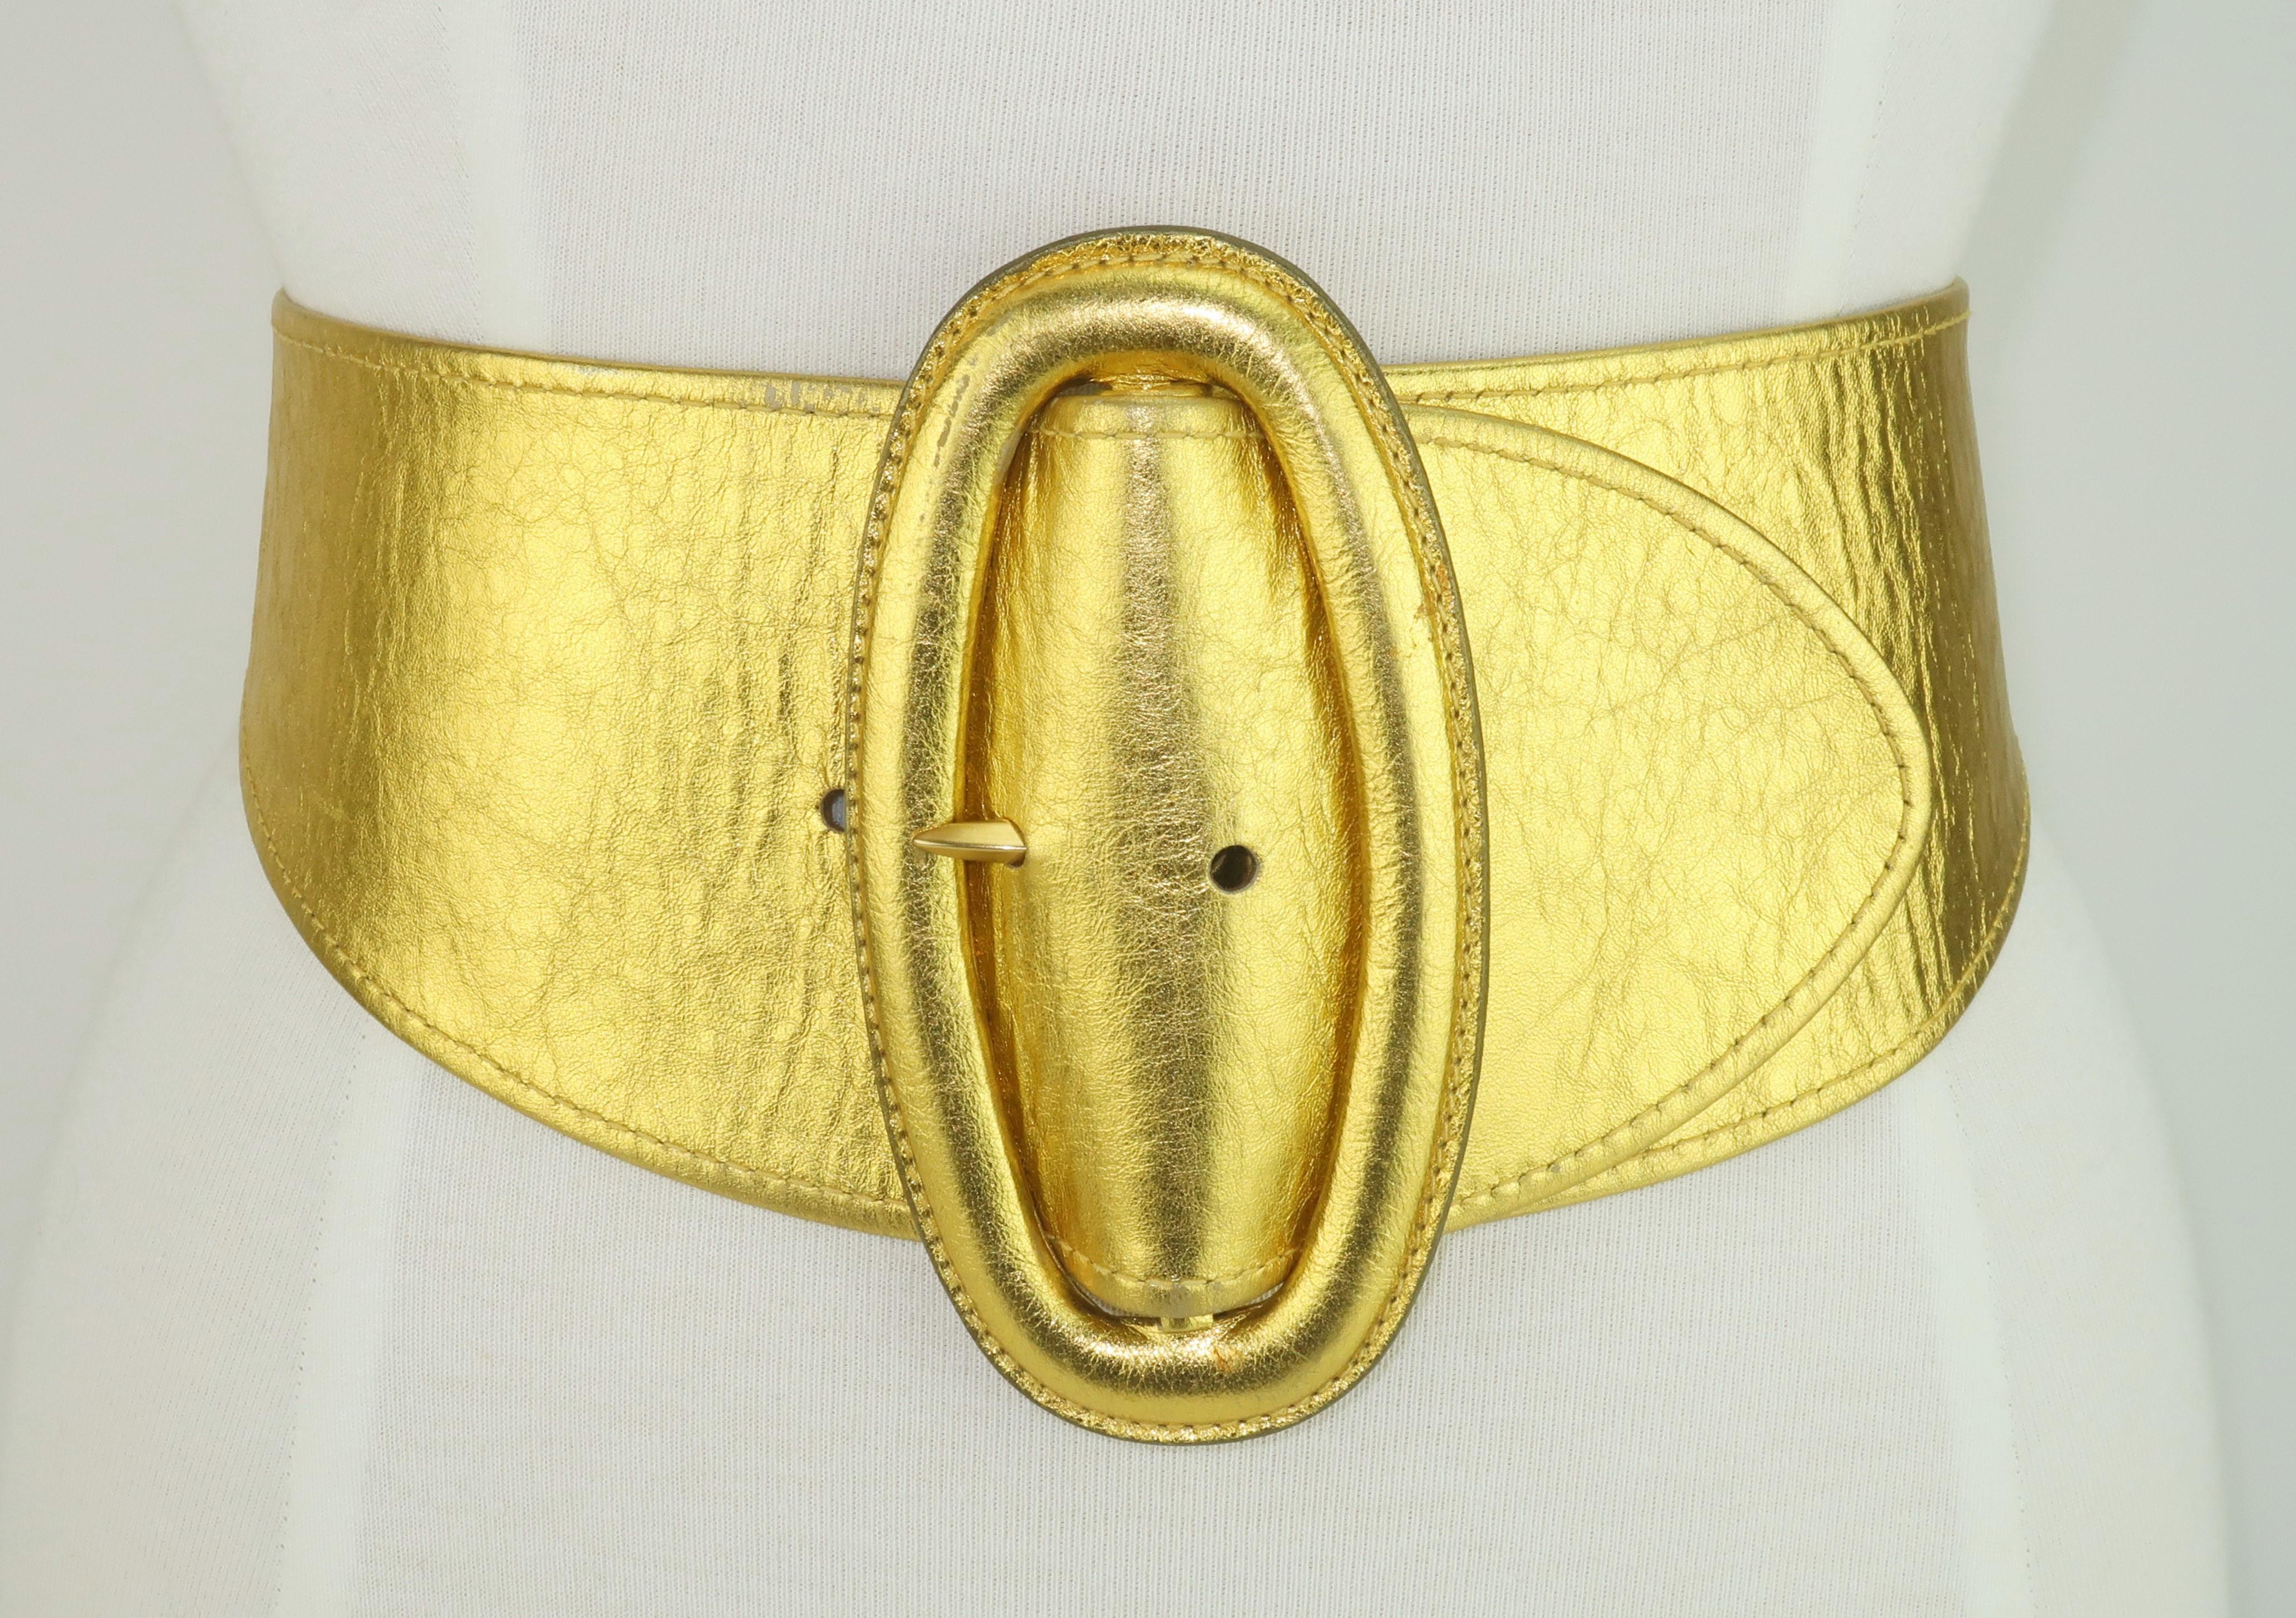 Be a fashion superhero with this strikingly wide gold leather belt from Donna Karan. The 1980’s sculptural silhouette accents the elongated oval buckle which tapers at the back. Marked a size 'Small' and made in Italy ... a true wardrobe essential